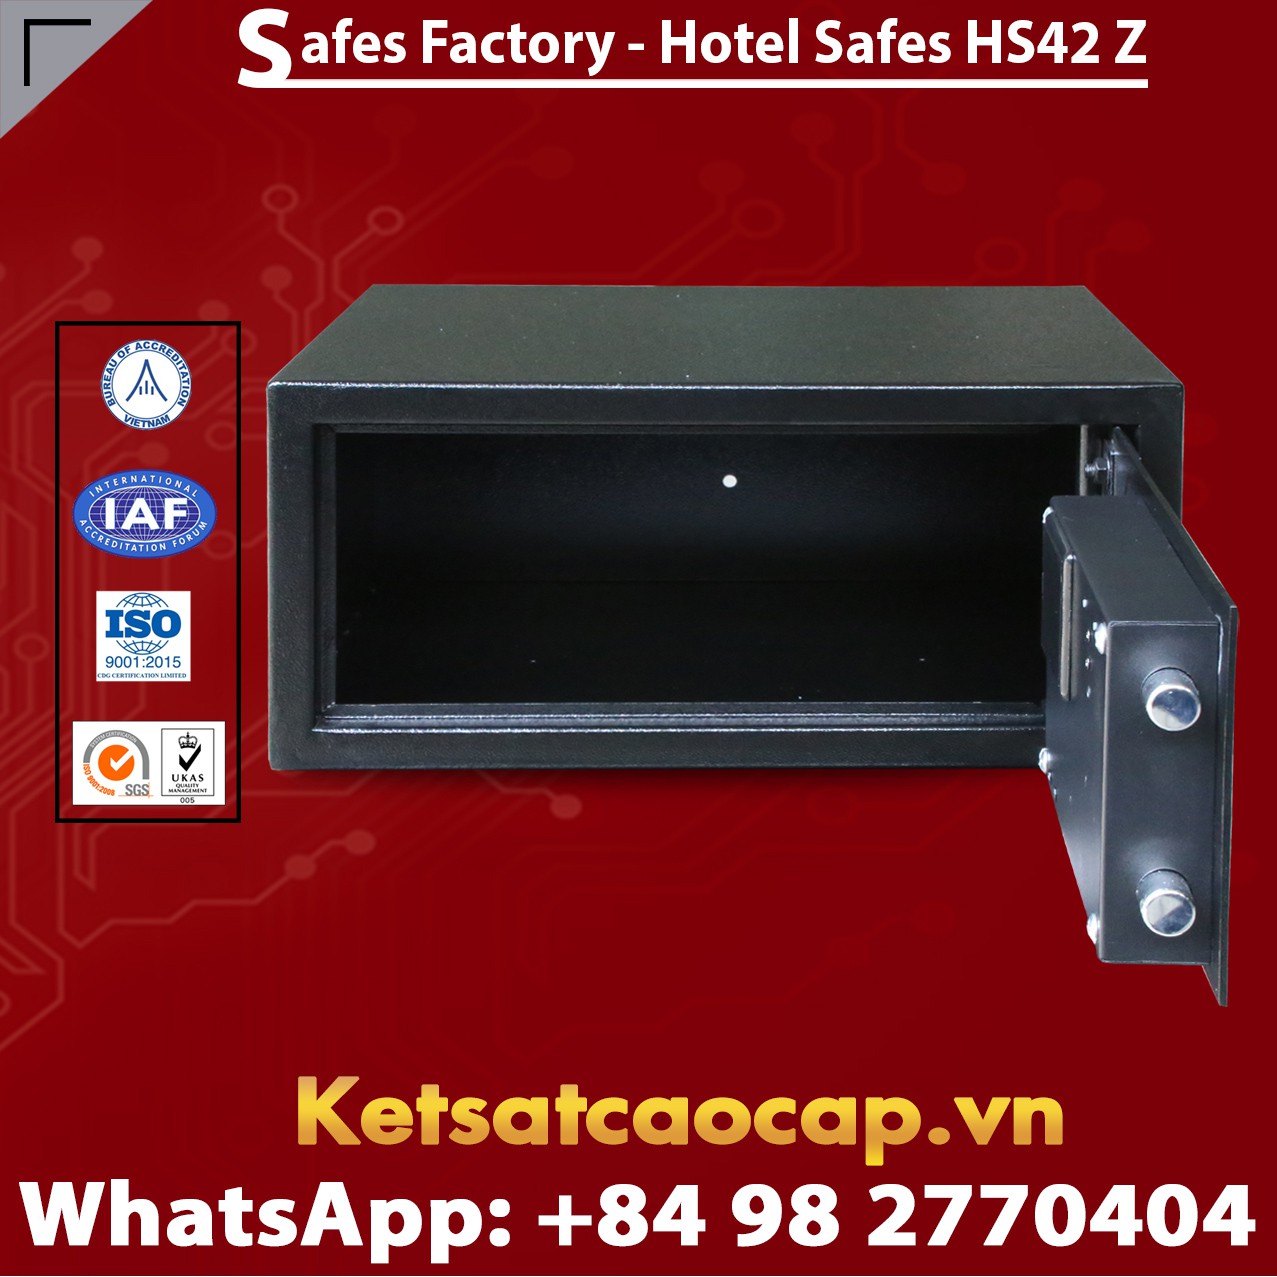 Hotel Safe High Quality Factory Price uy tín